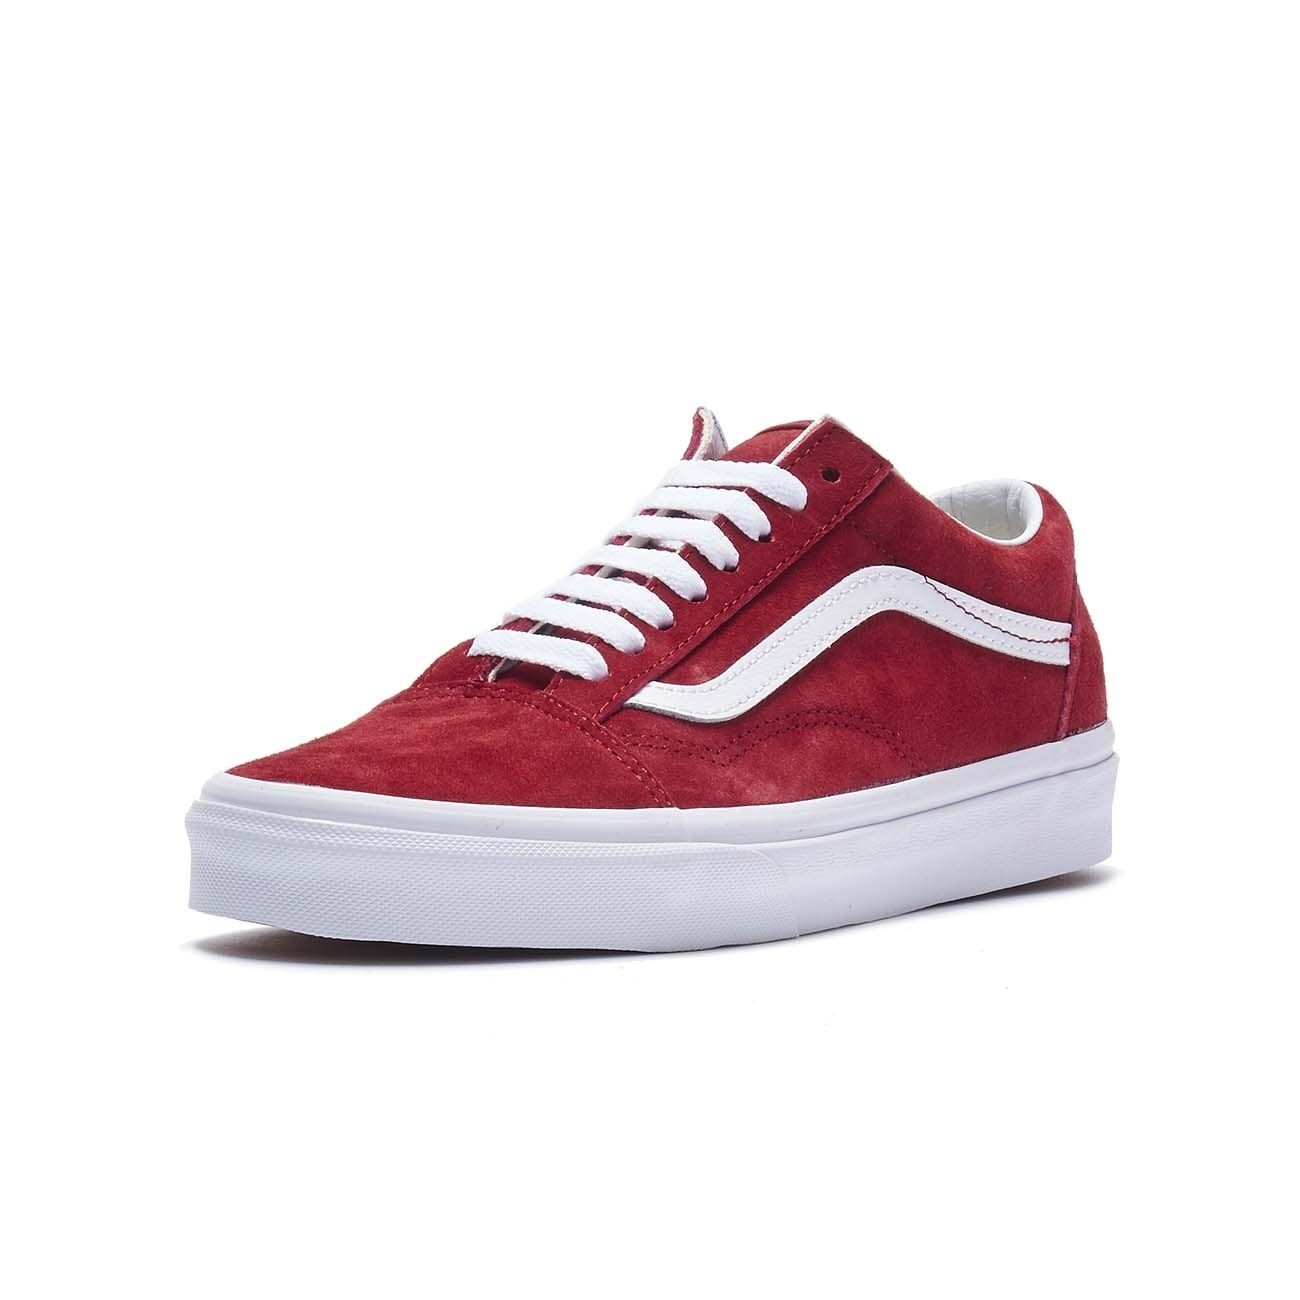 vans old skool scooter red & true white shoes